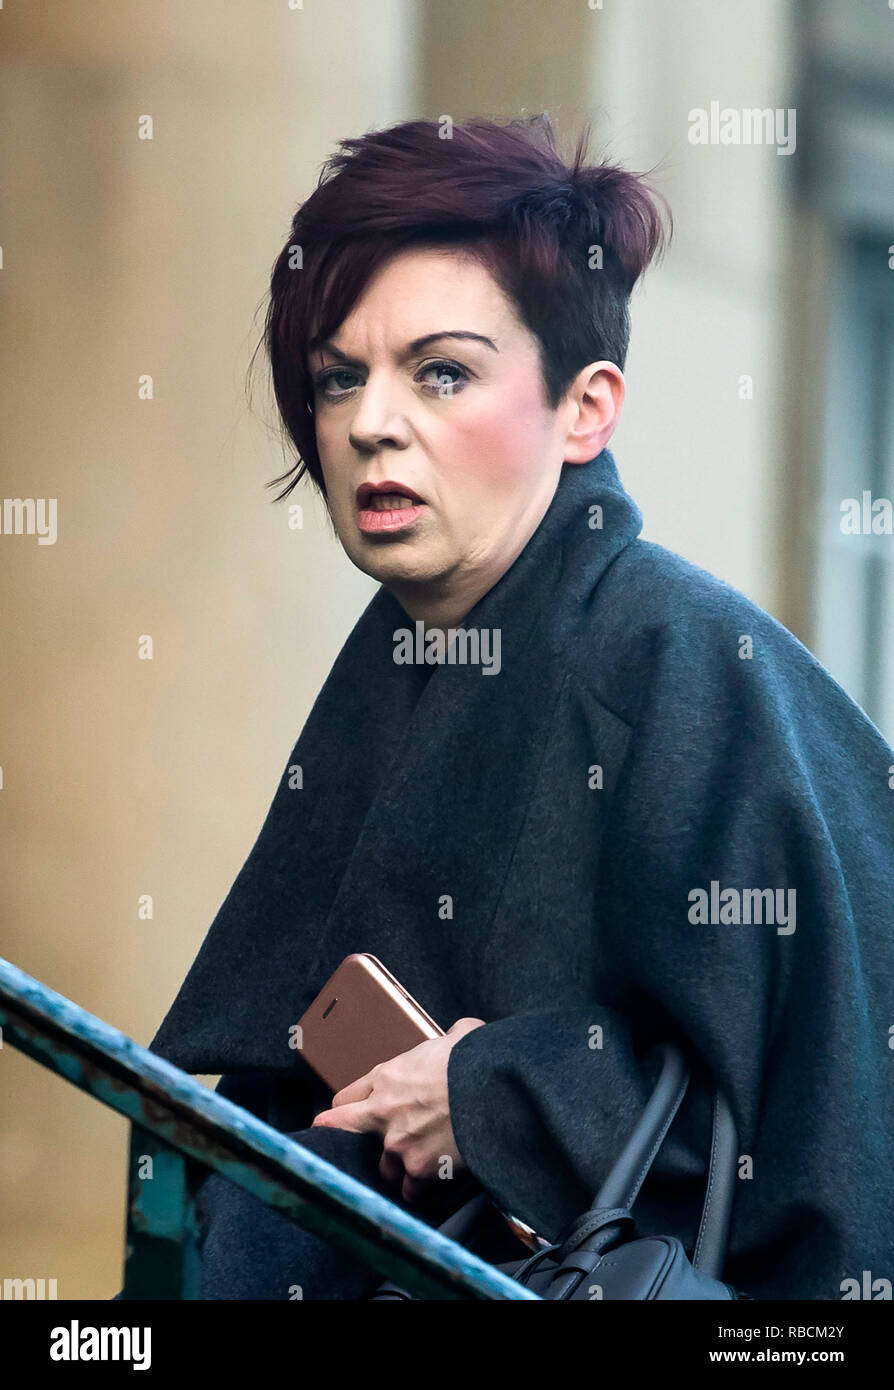 Patricia Robertshaw, who pretended to be ill, arrives at York Crown court ahead of pleading guilty to defrauding a cancer charity out of more than £90,000. Stock Photo